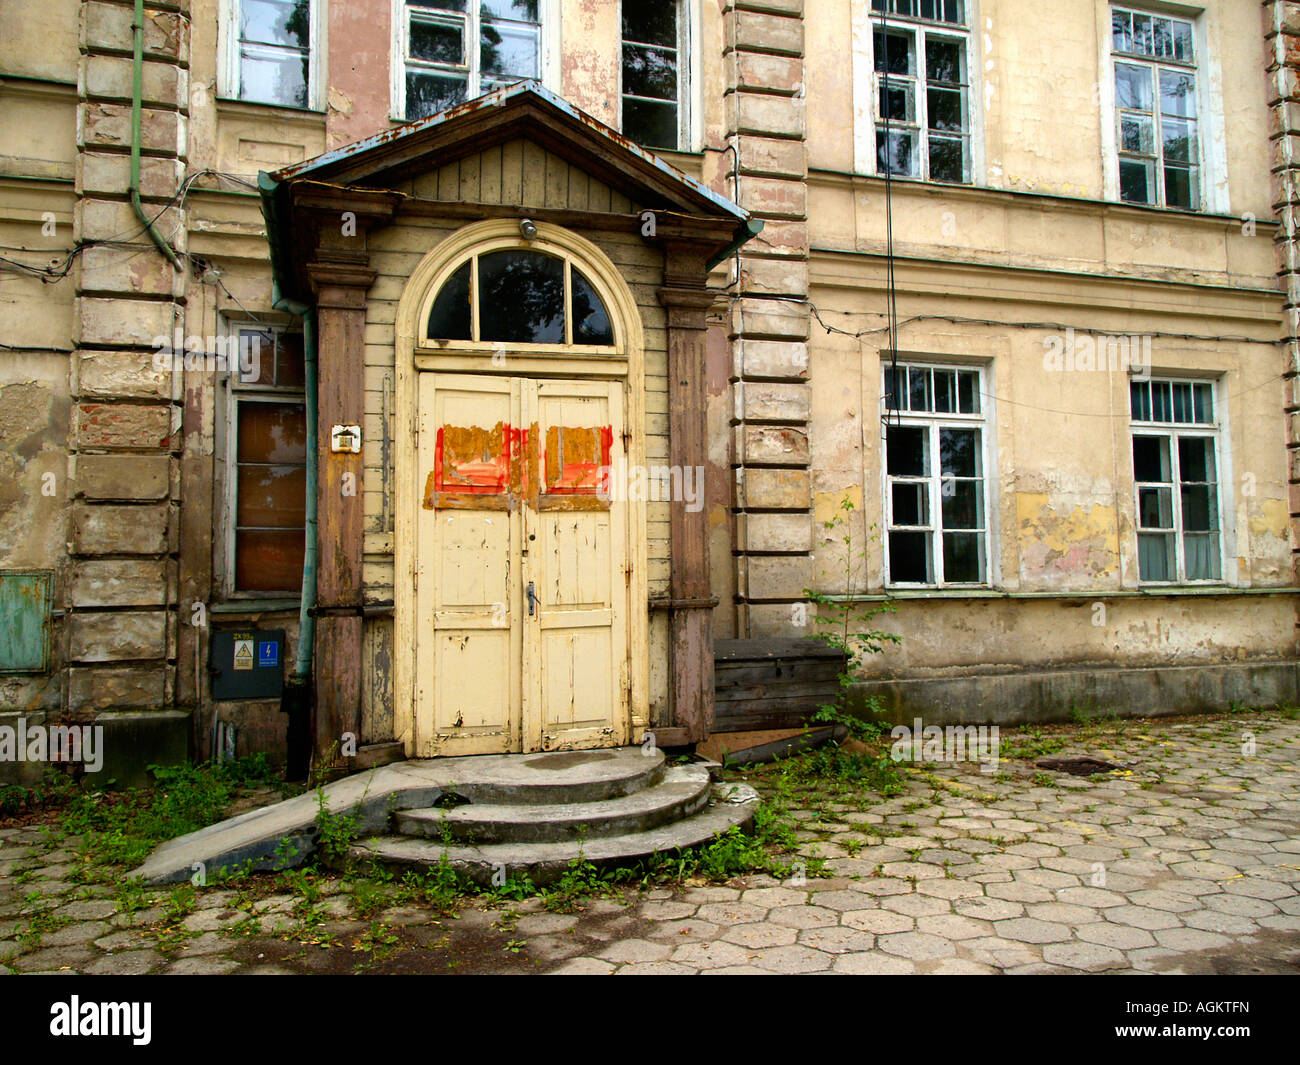 Entrance to an abandoned masonry hospital building in Suwalki, Poland, with stone courtyard and arched doorway. Stock Photo